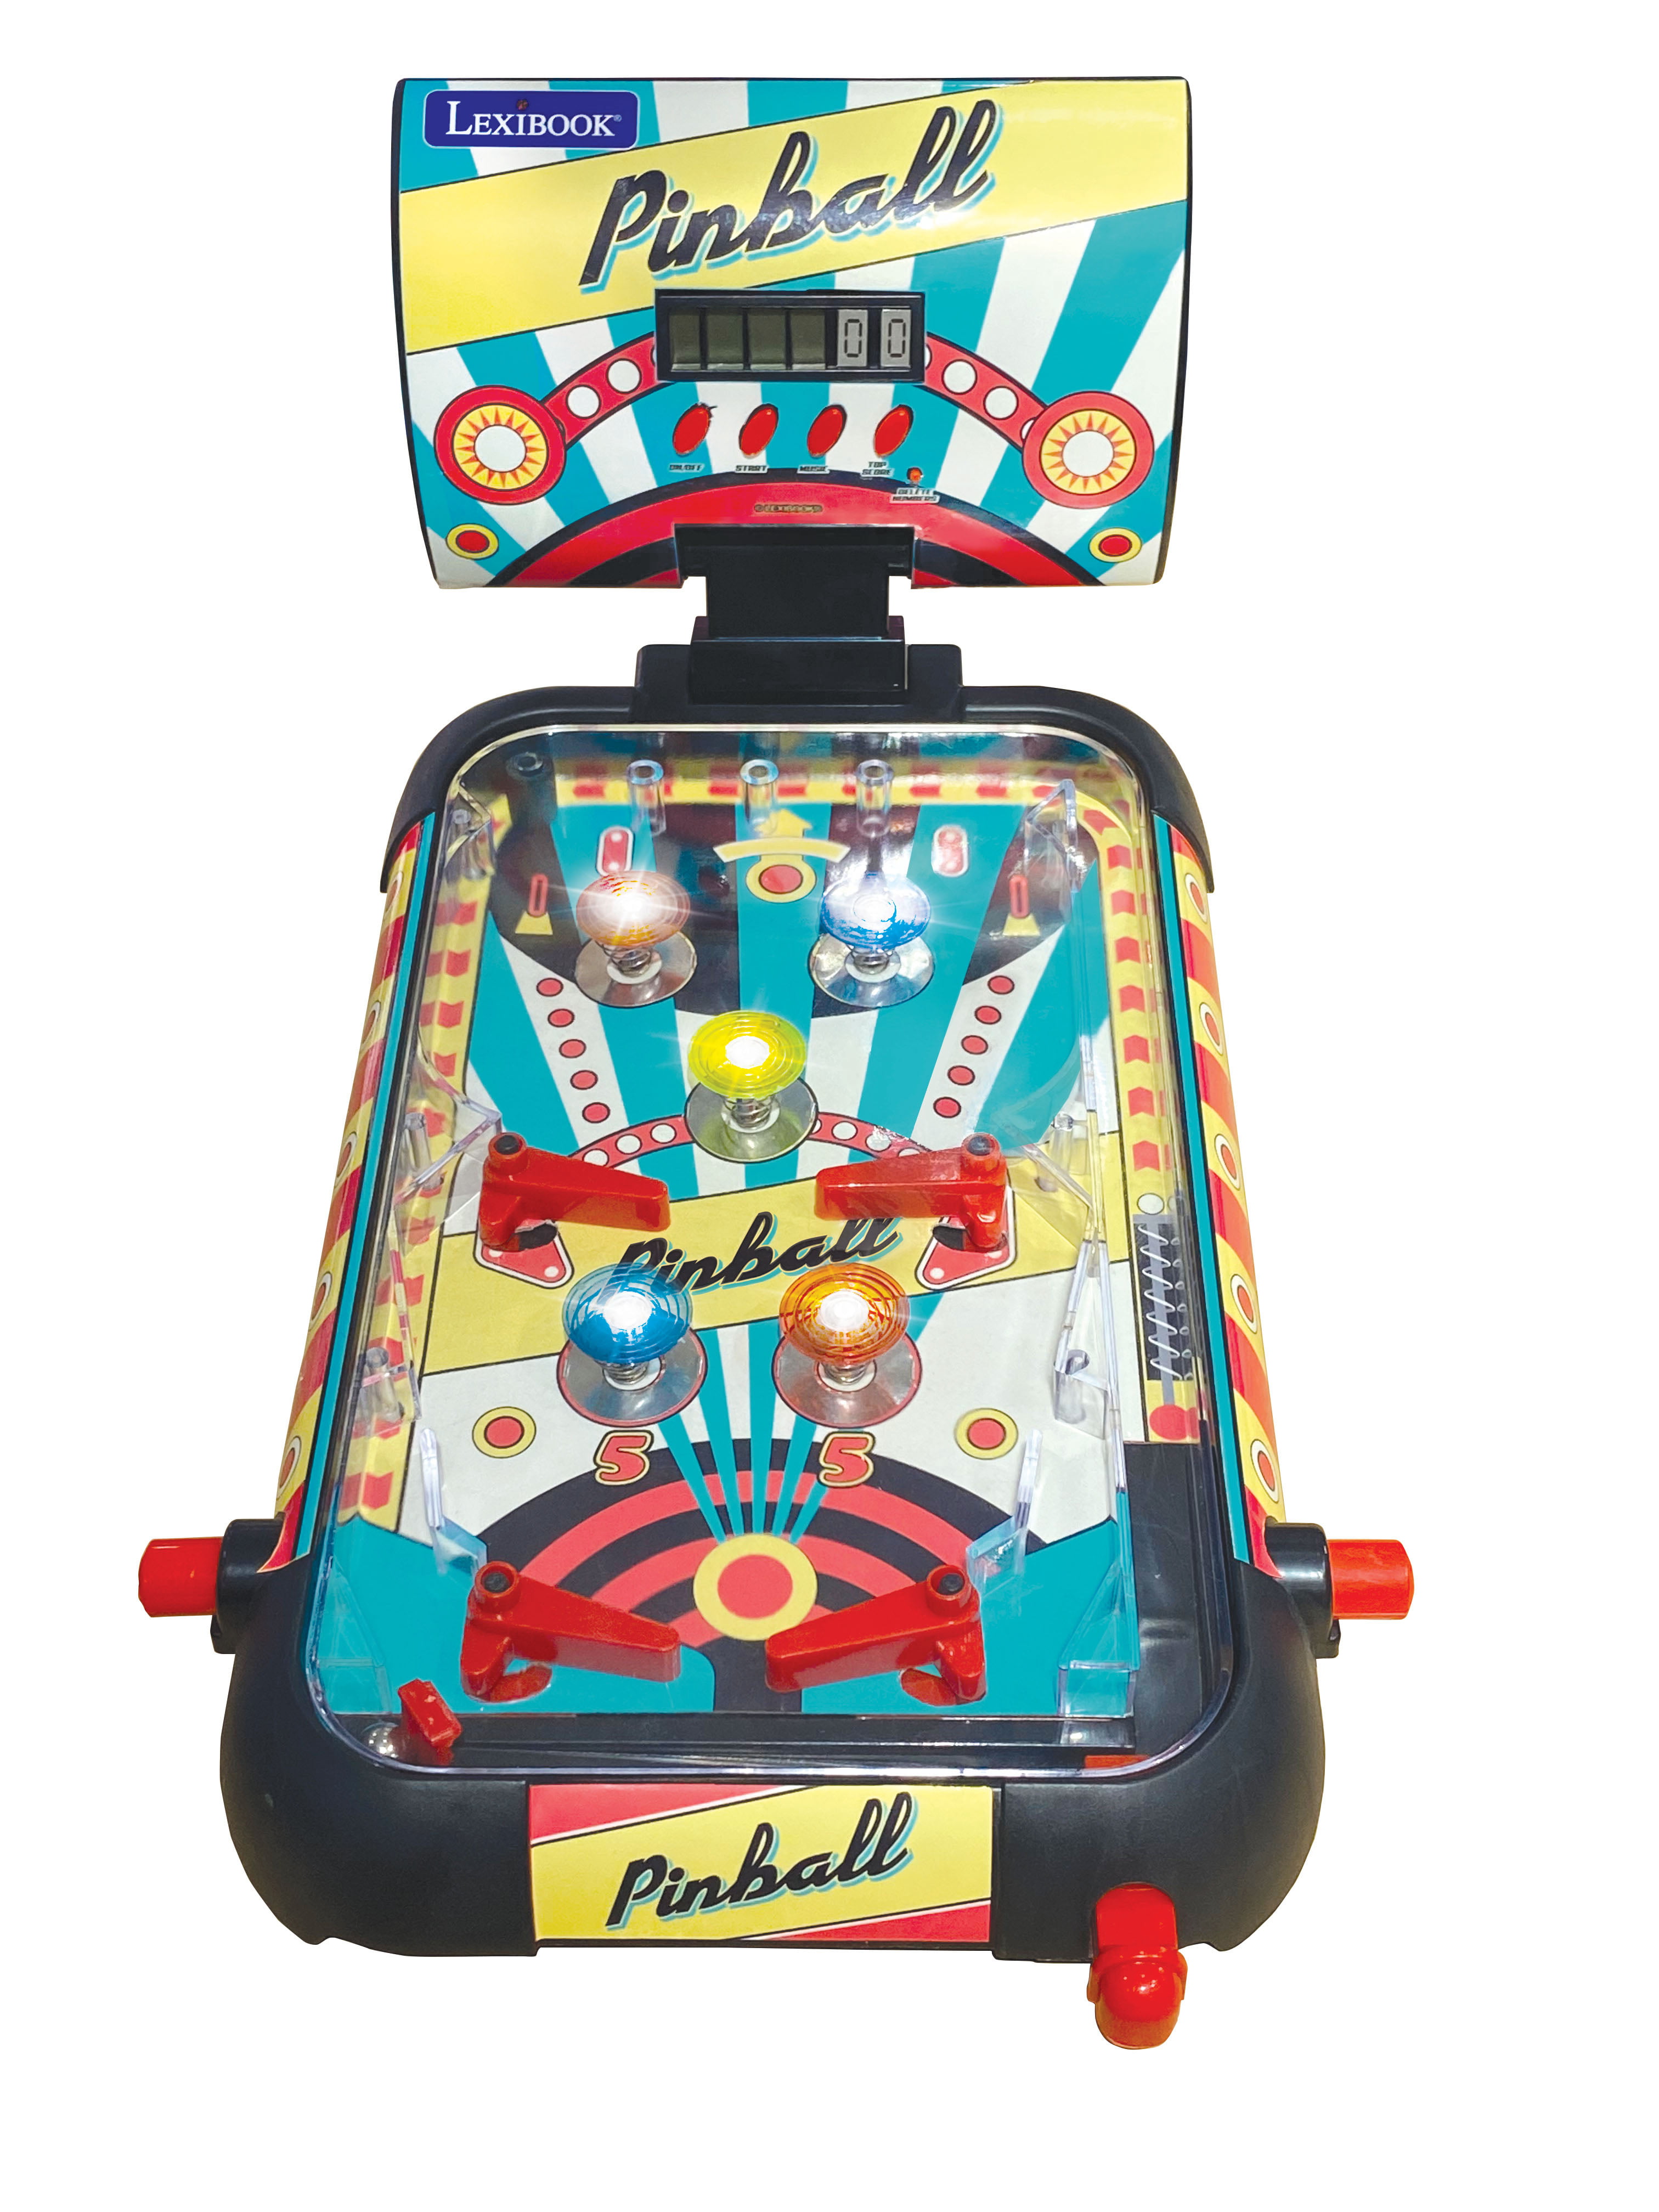 Pinball machine children's ejection parent-child interaction game pinball  table game online popular children's educational toys